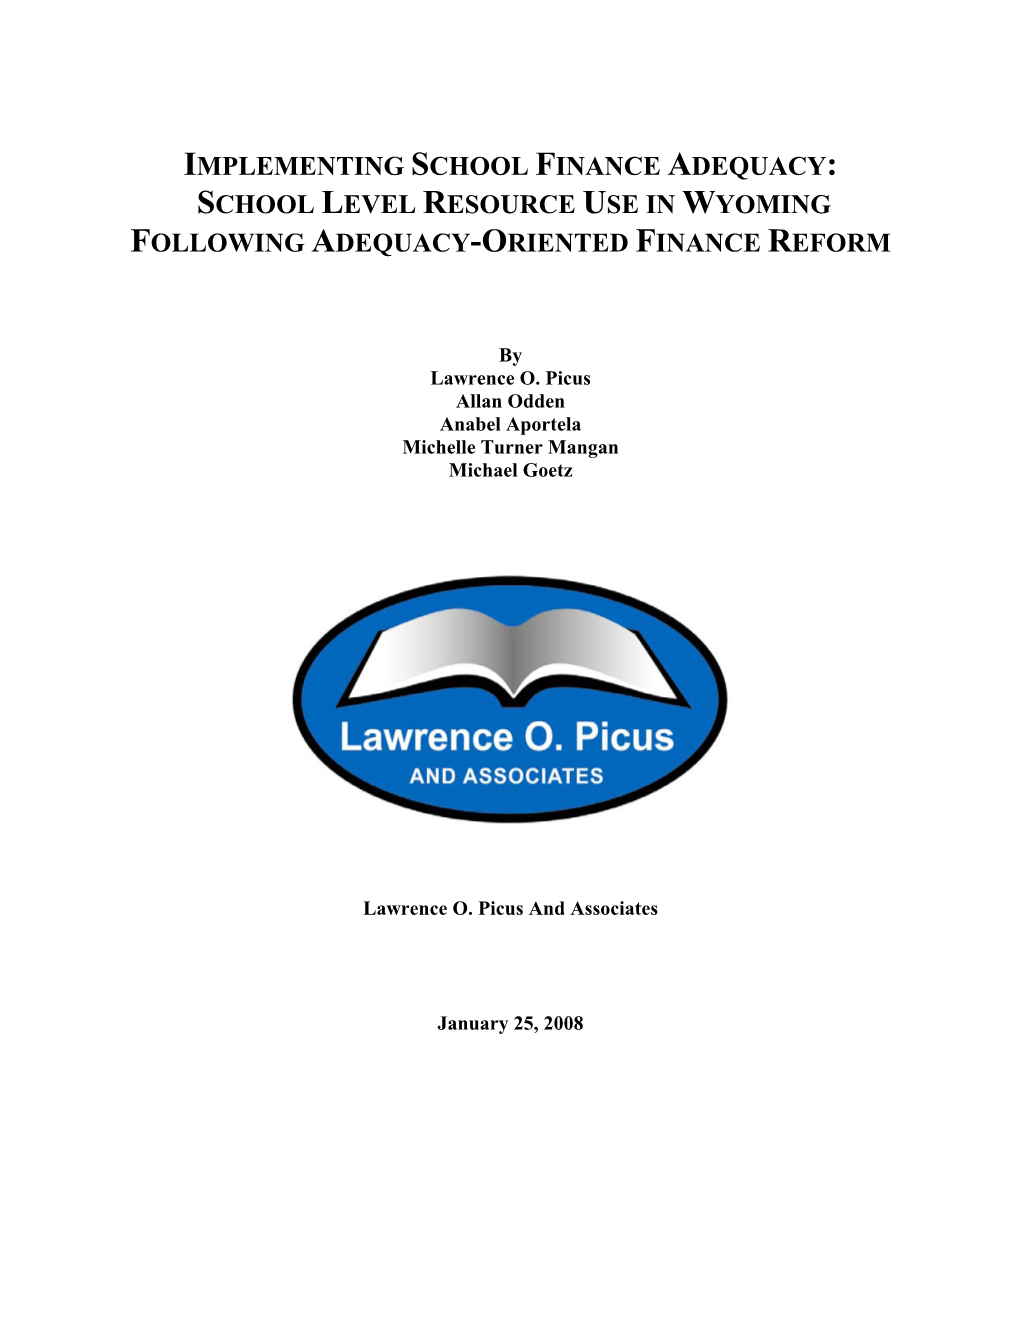 School Level Resource Use in Wyoming Following Adequacy-Oriented Finance Reform